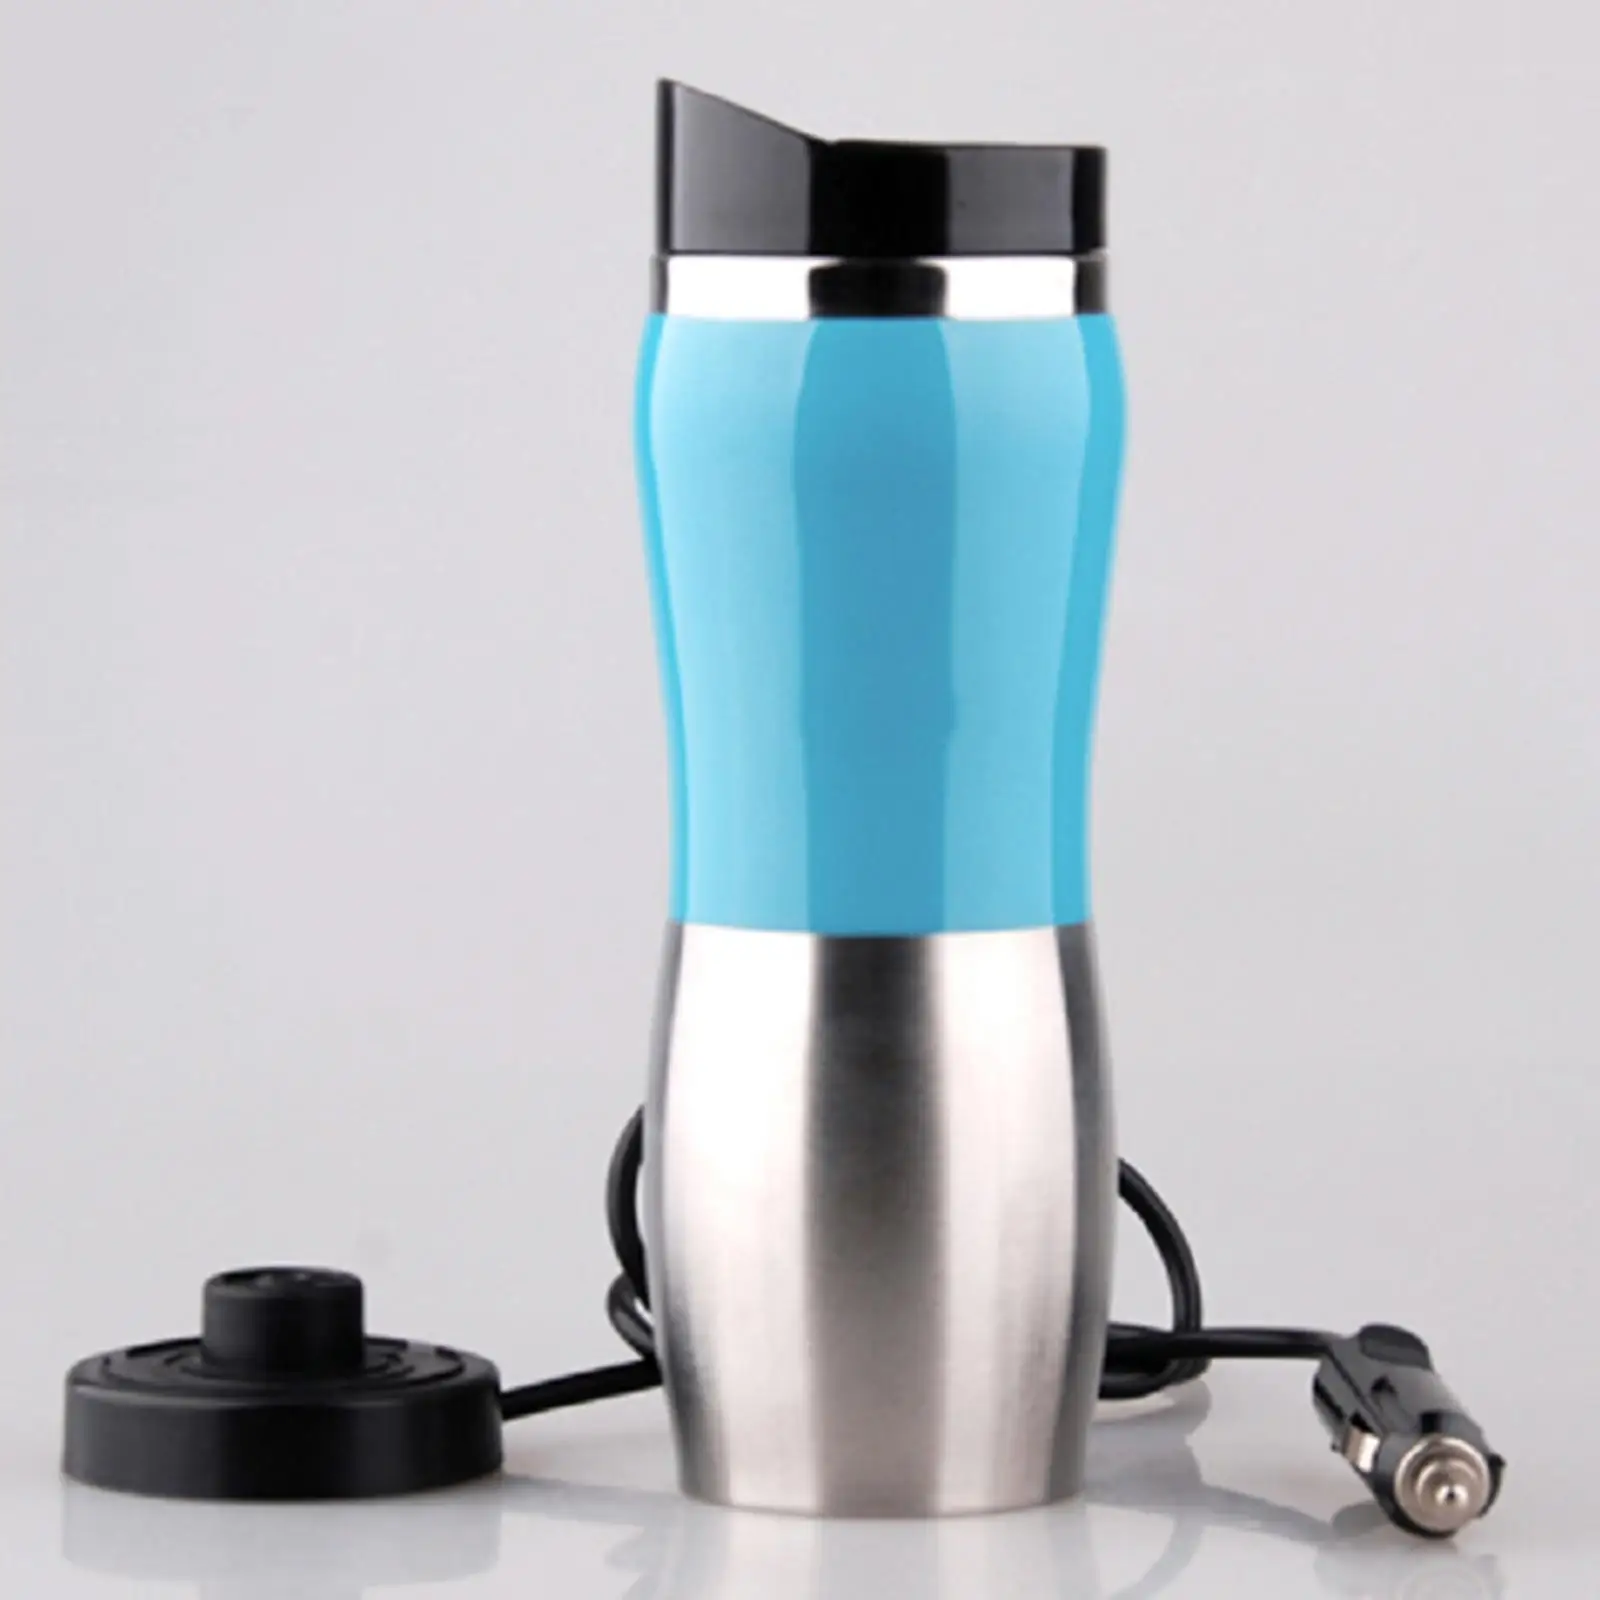 Car Electric Kettle 400ml 24V Stainless Steel Electric Auto Heating Bottle Car Water Heater for Hot Water Camping Boat Travel